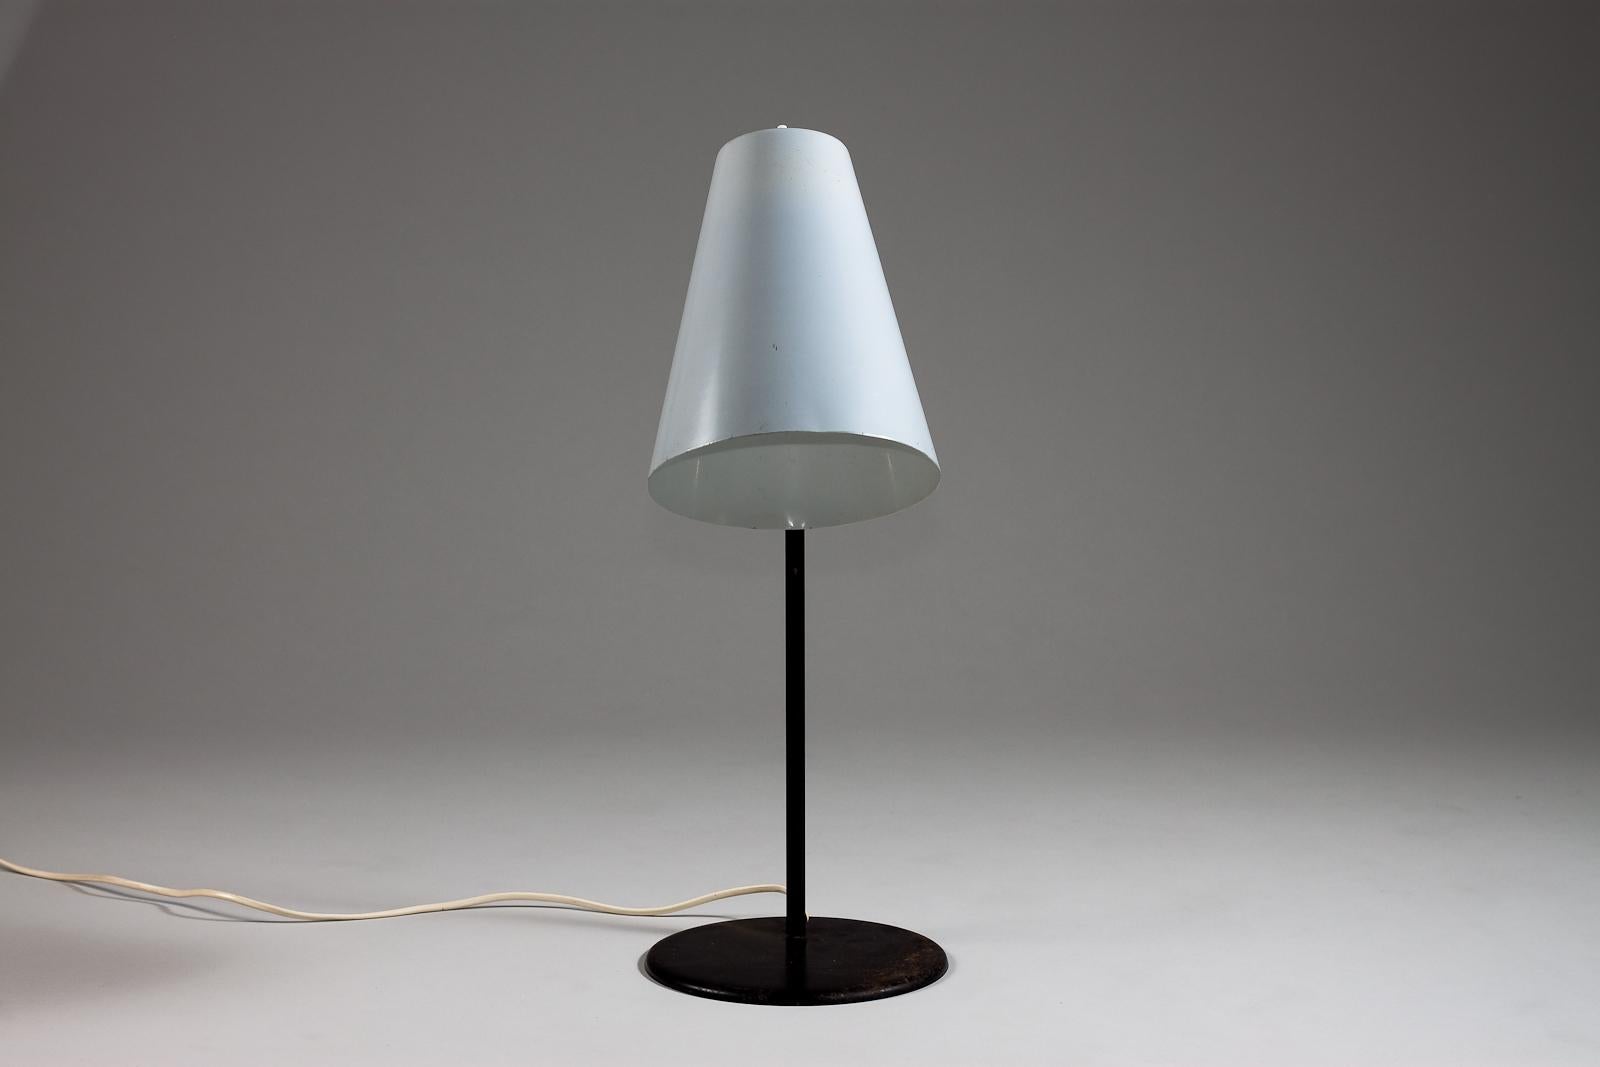 Introducing the timeless beauty of Paavo Tynell's 1960's table lamp, designed for Idman Oy in Finland. The lamp boasts a simple yet elegant design, bringing a touch of vintage charm to any living or workspace. It emits a gentle, warm illumination,